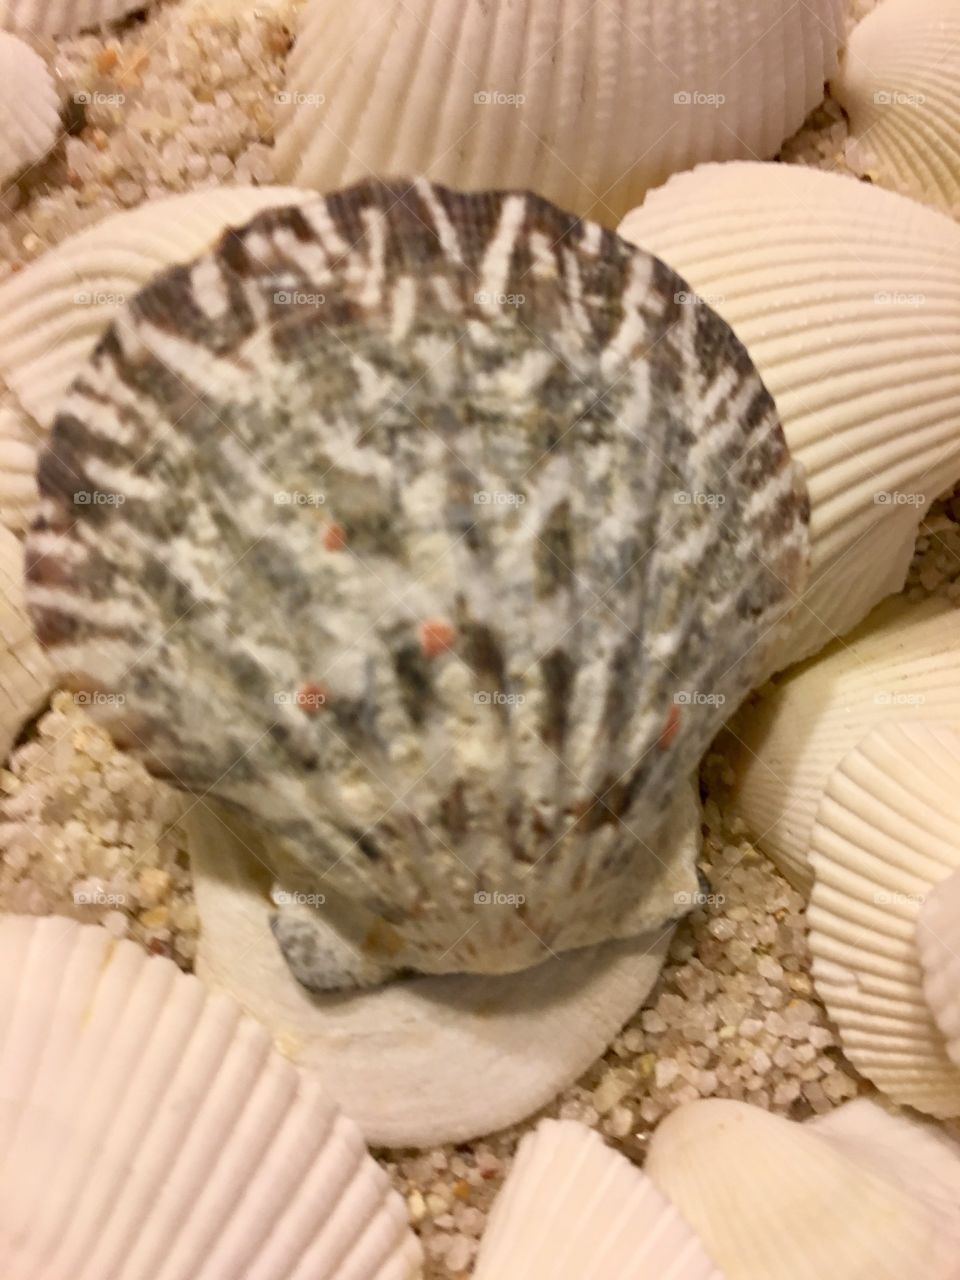 Extreme close-up of scallop shells